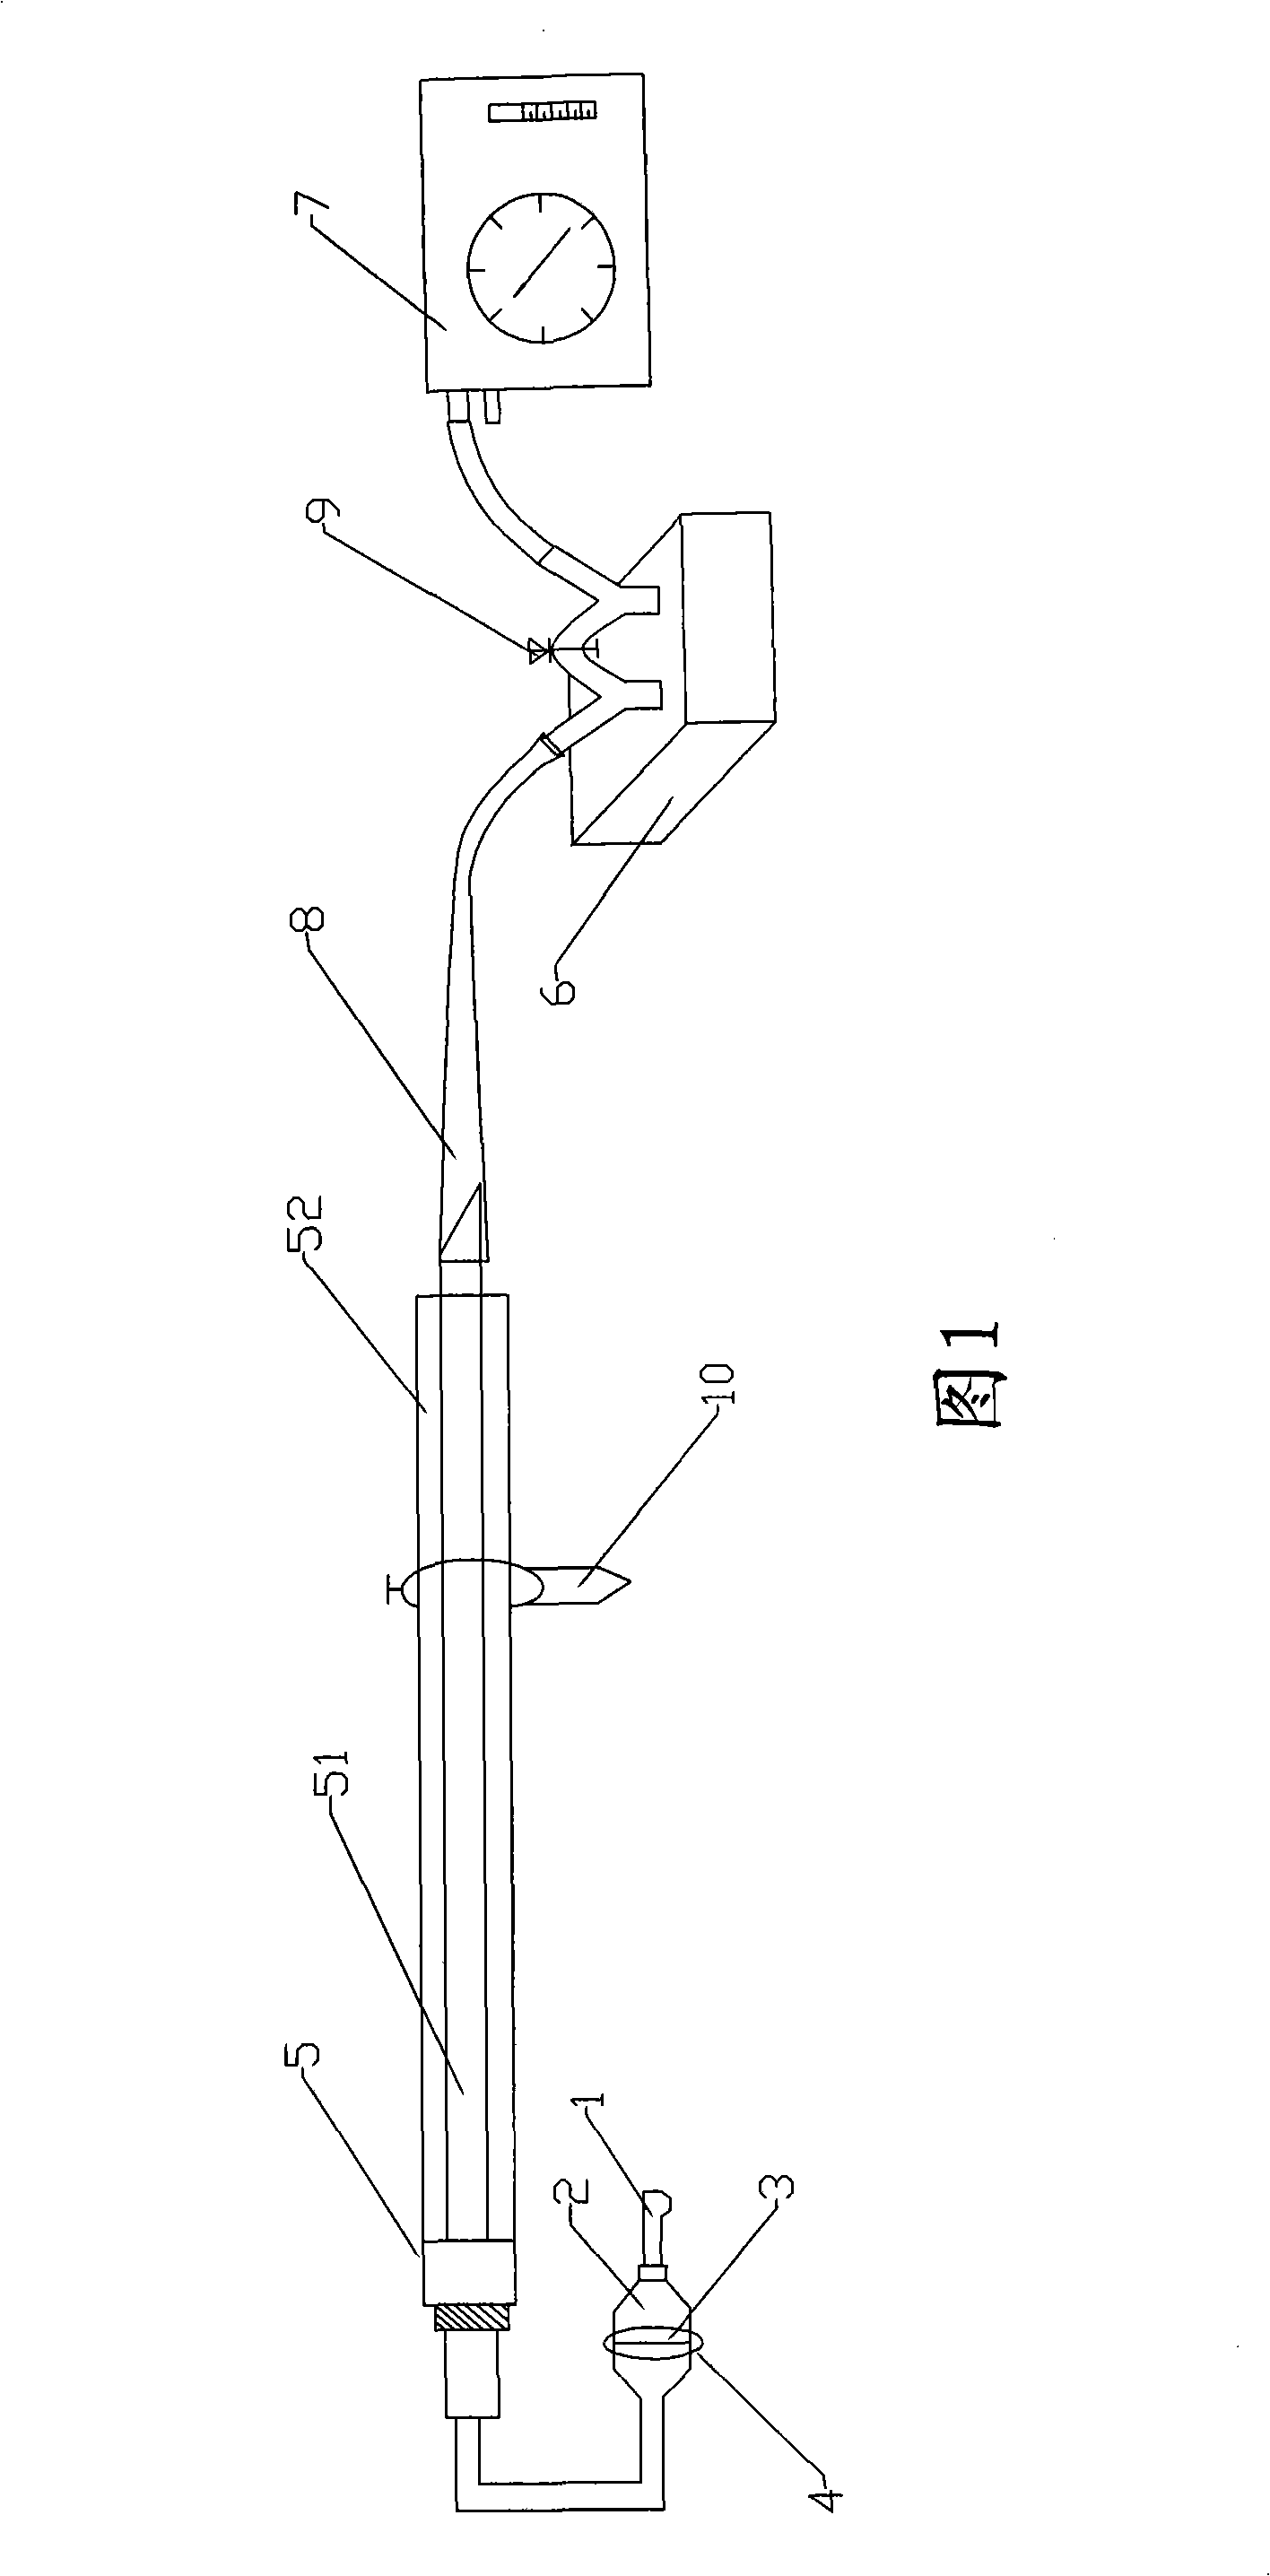 Equipment and method for measuring dust content in flue gas